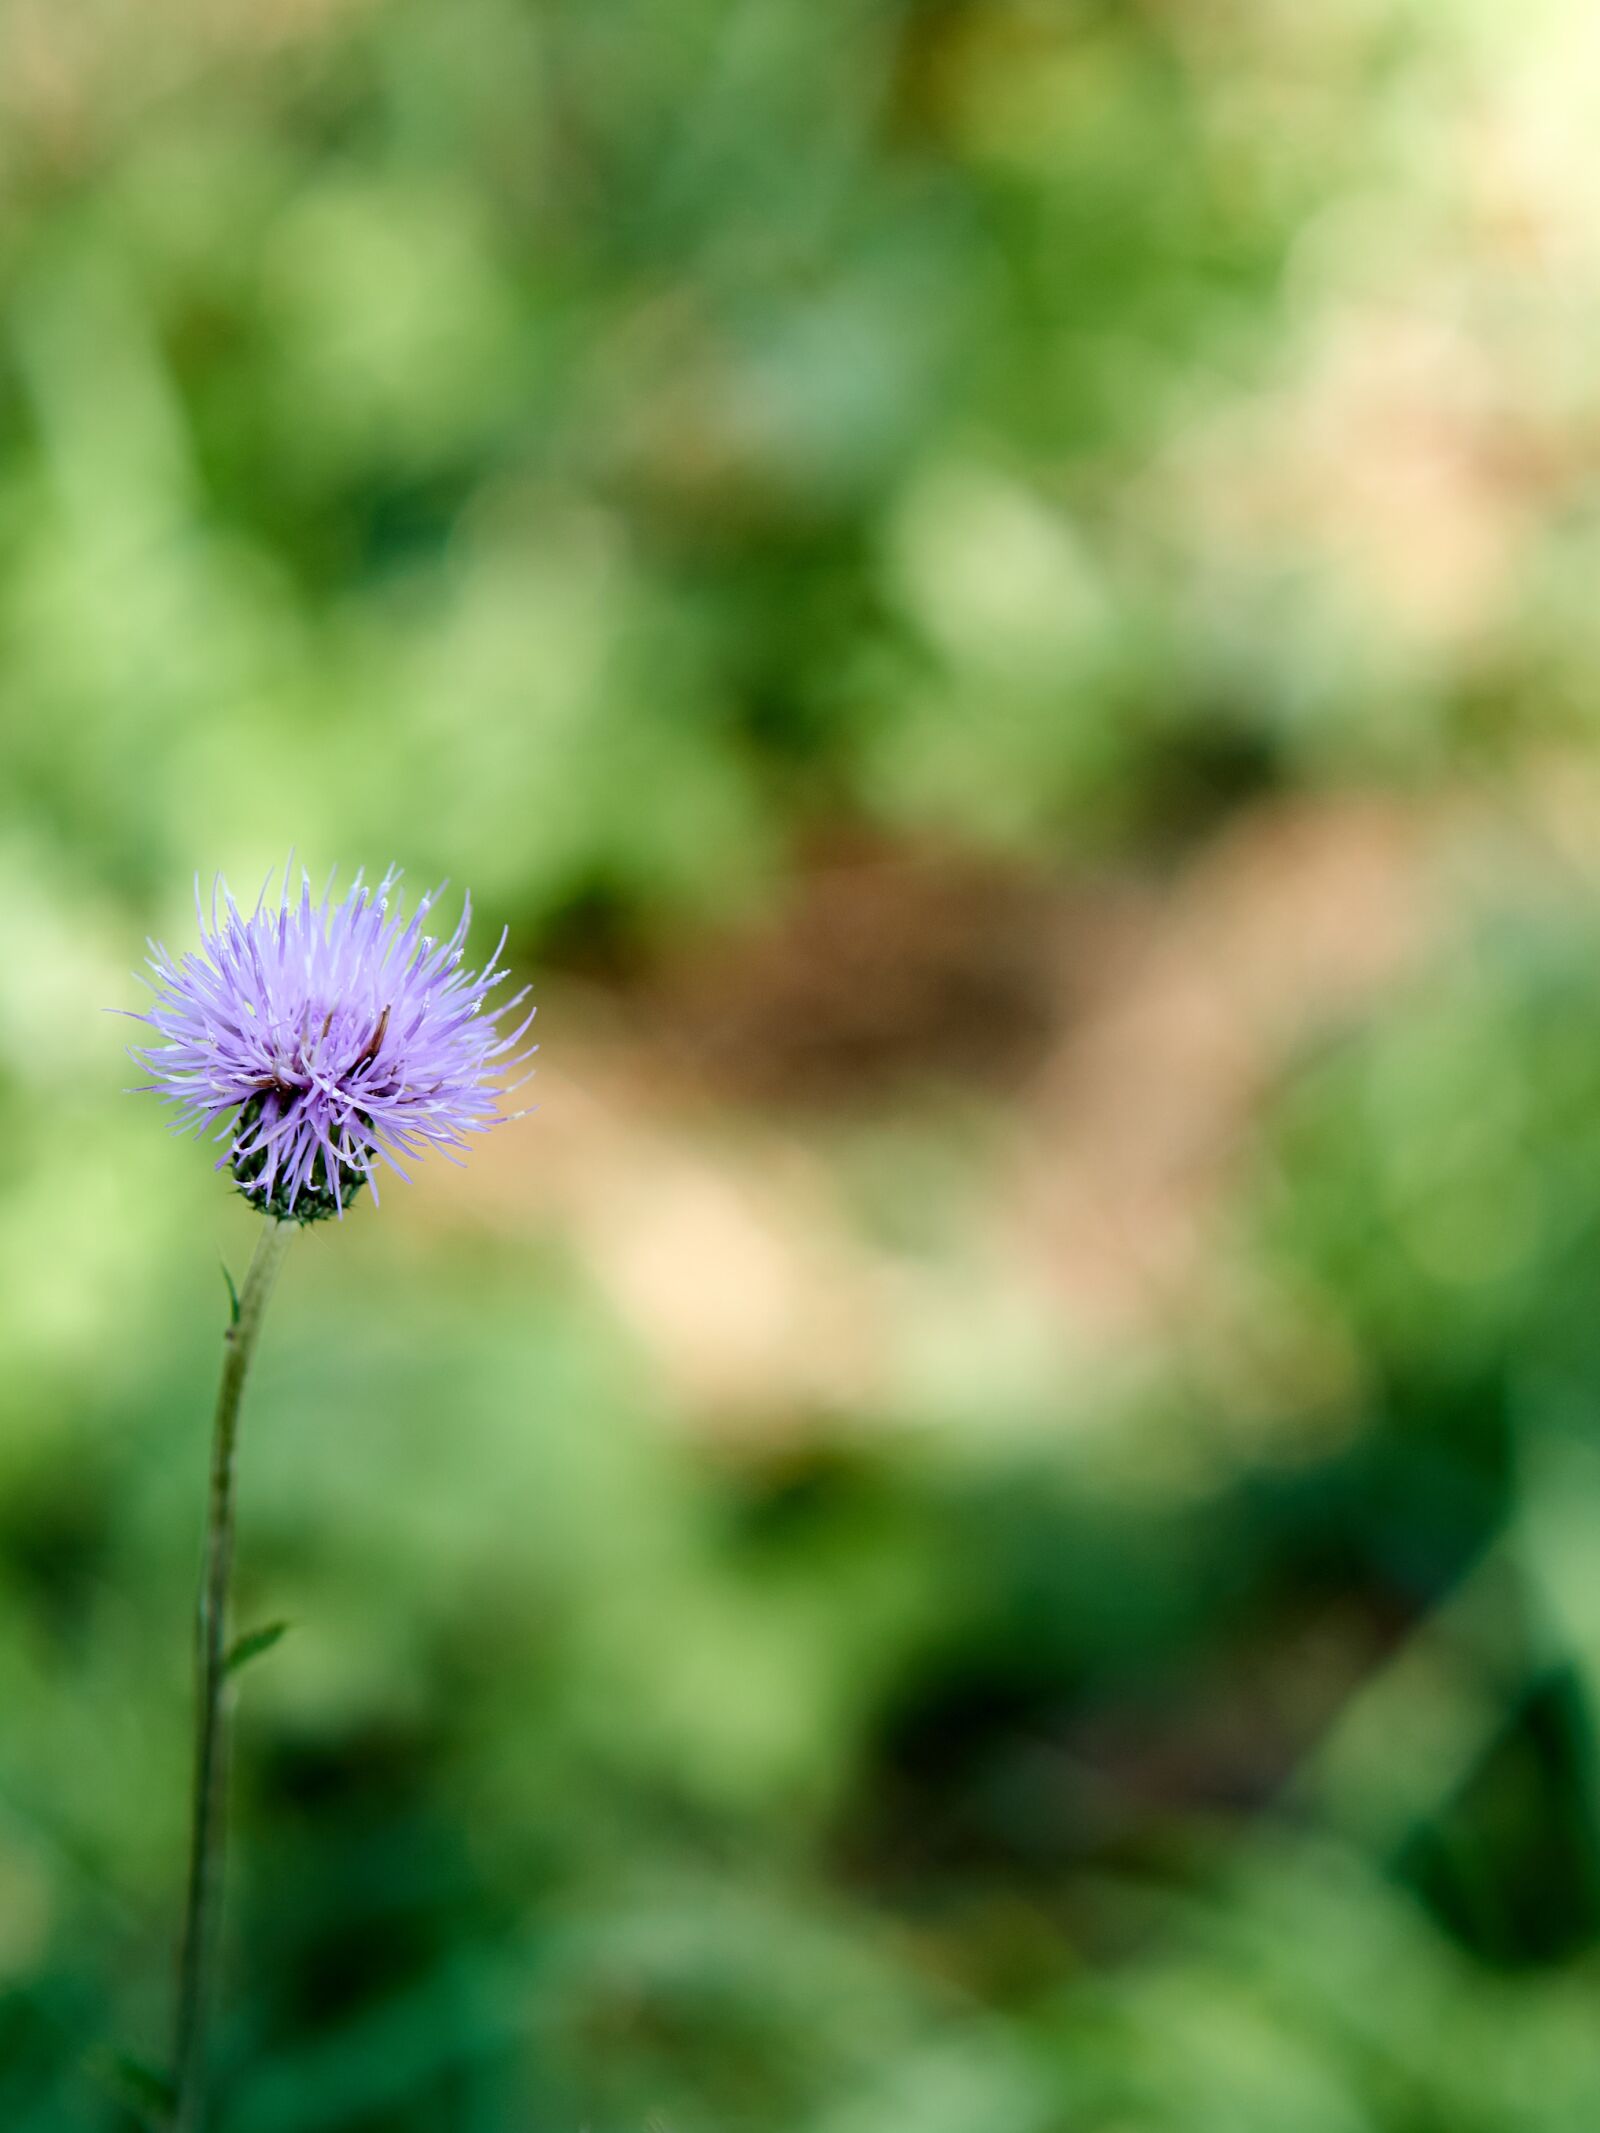 ZEISS Batis 85mm F1.8 sample photo. Flower, green, nature photography